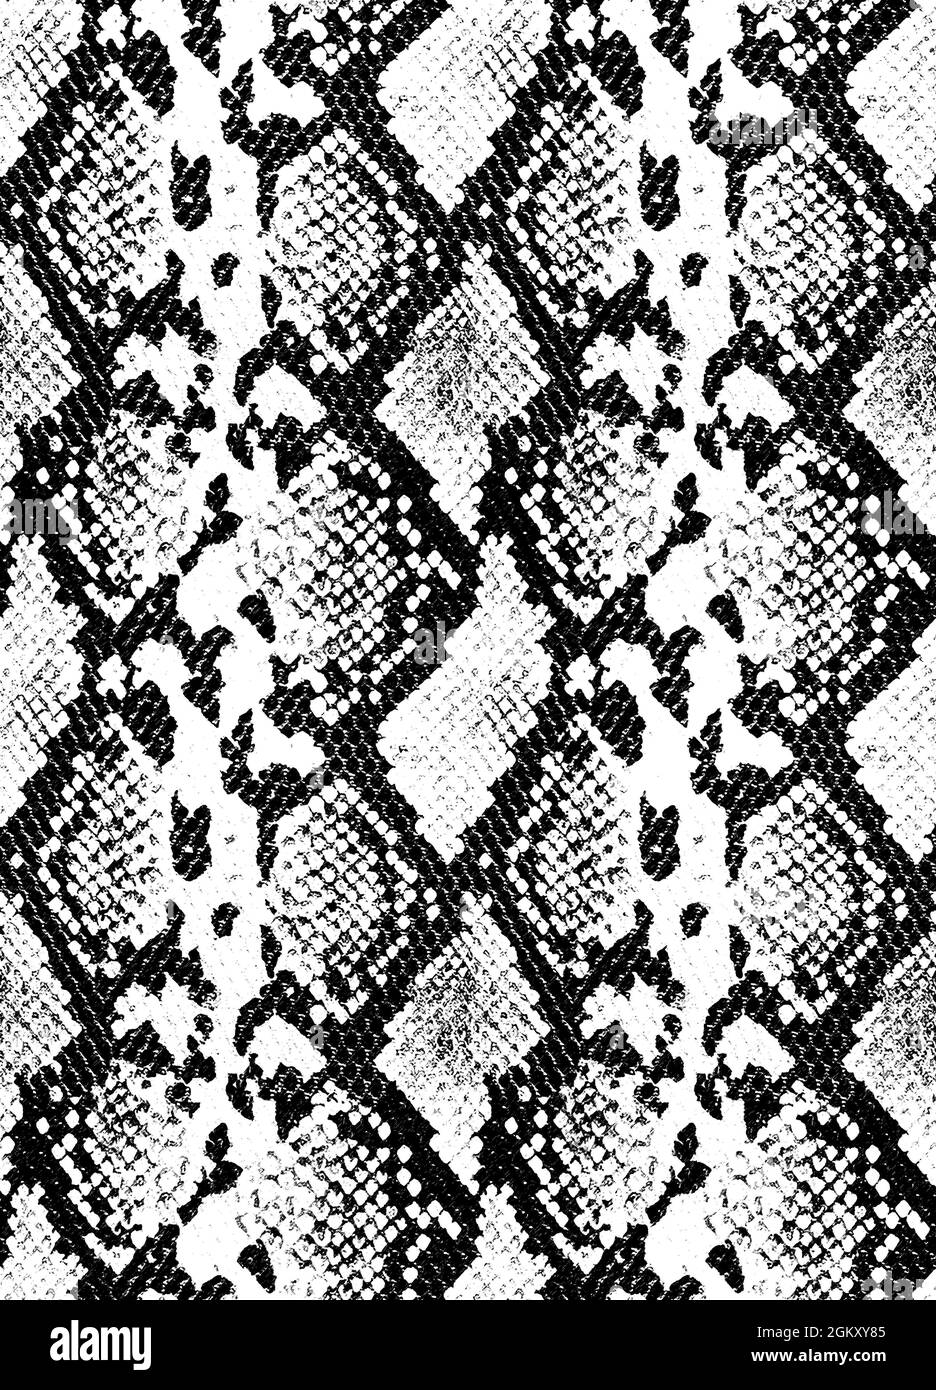 Snake skin texture Black and White Stock Photos & Images - Alamy